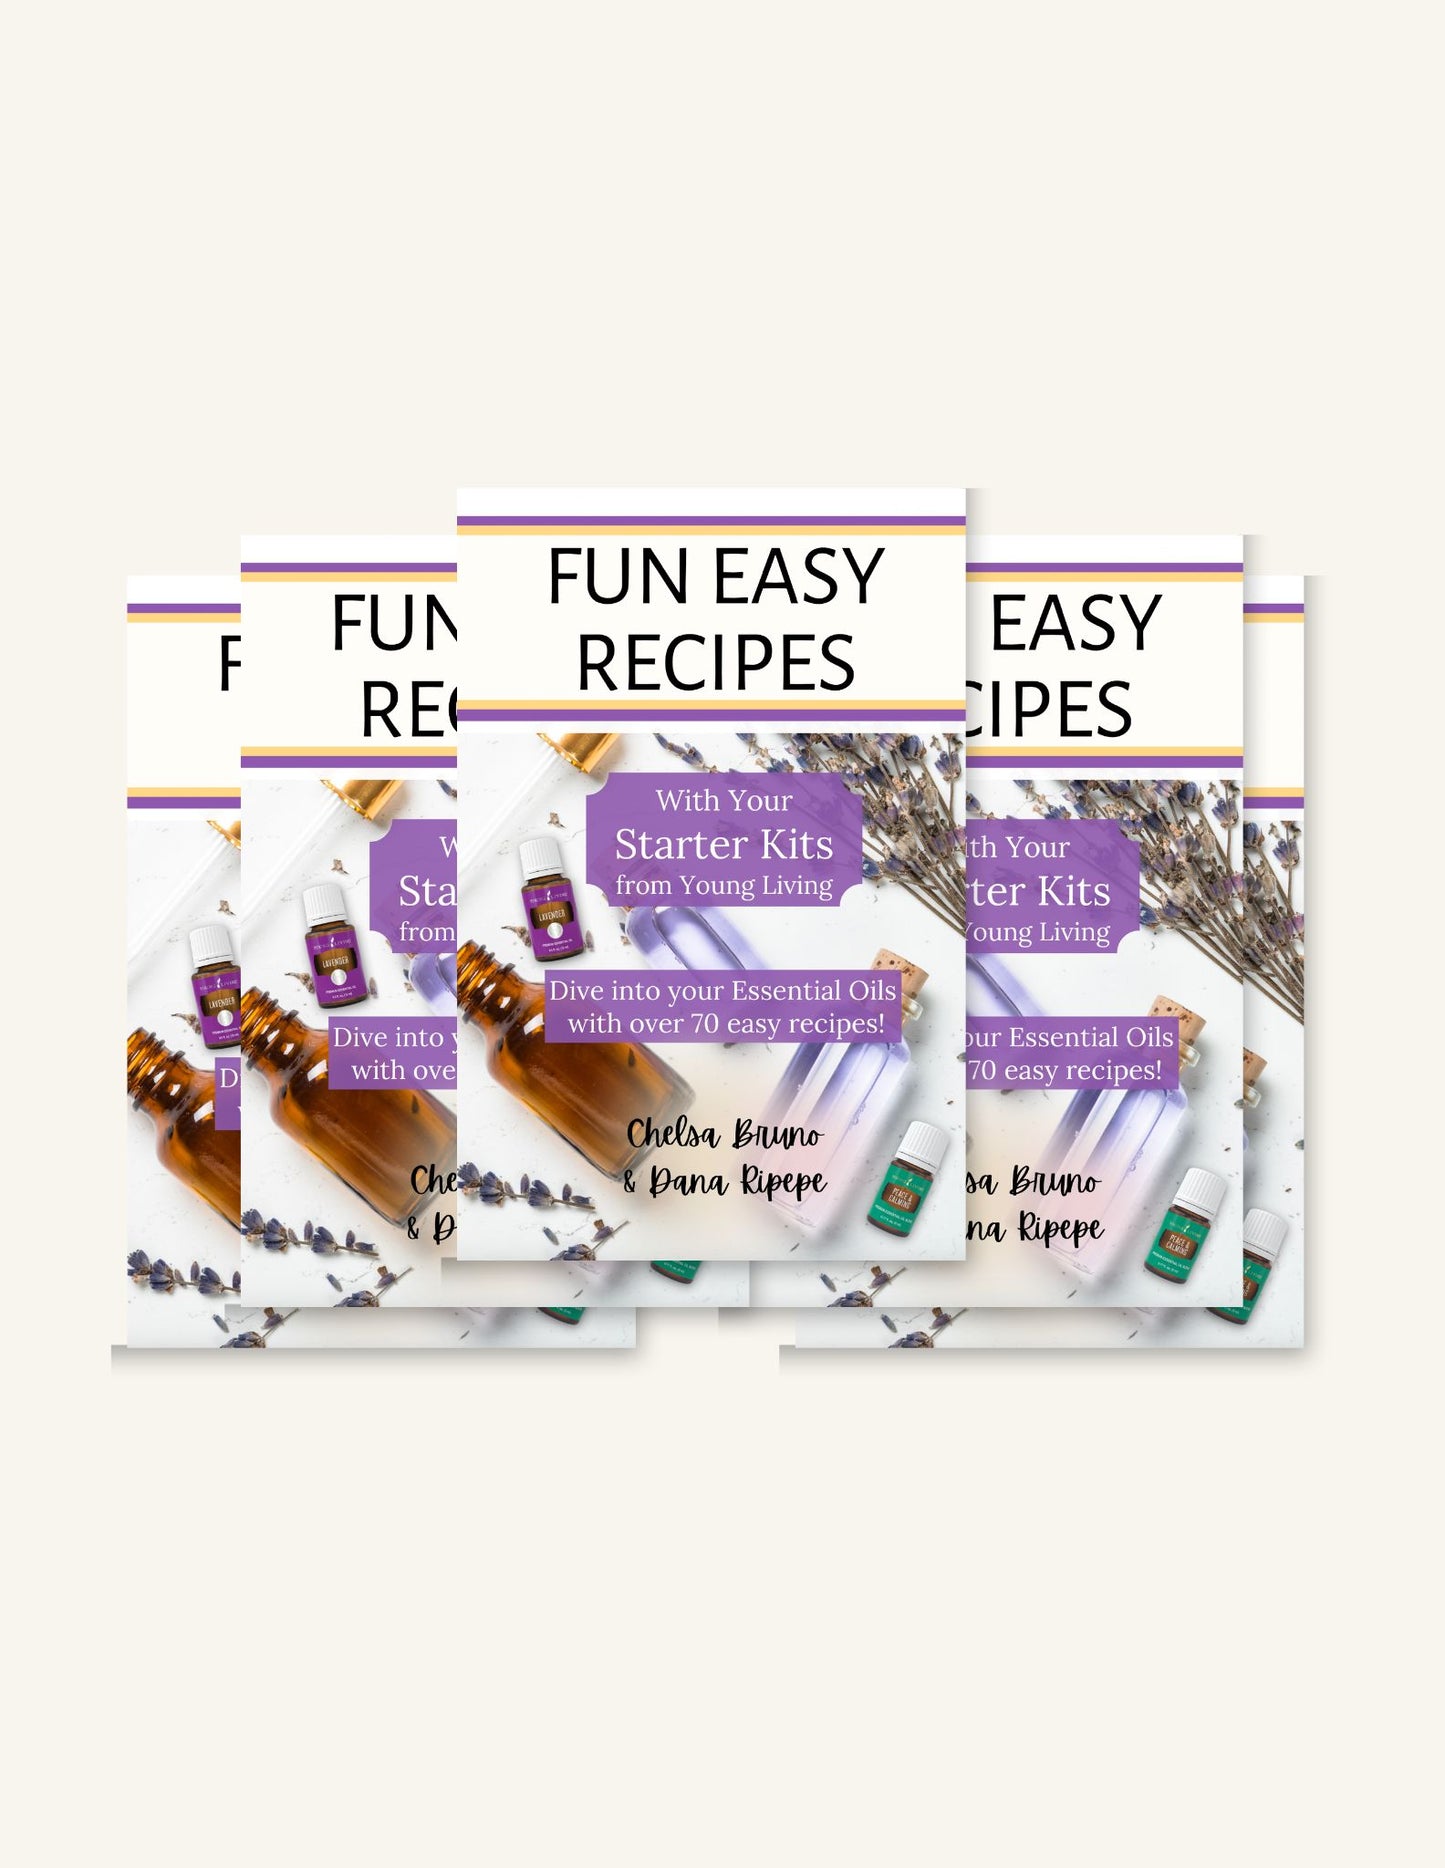 Fun, Easy Recipes (5 pack)